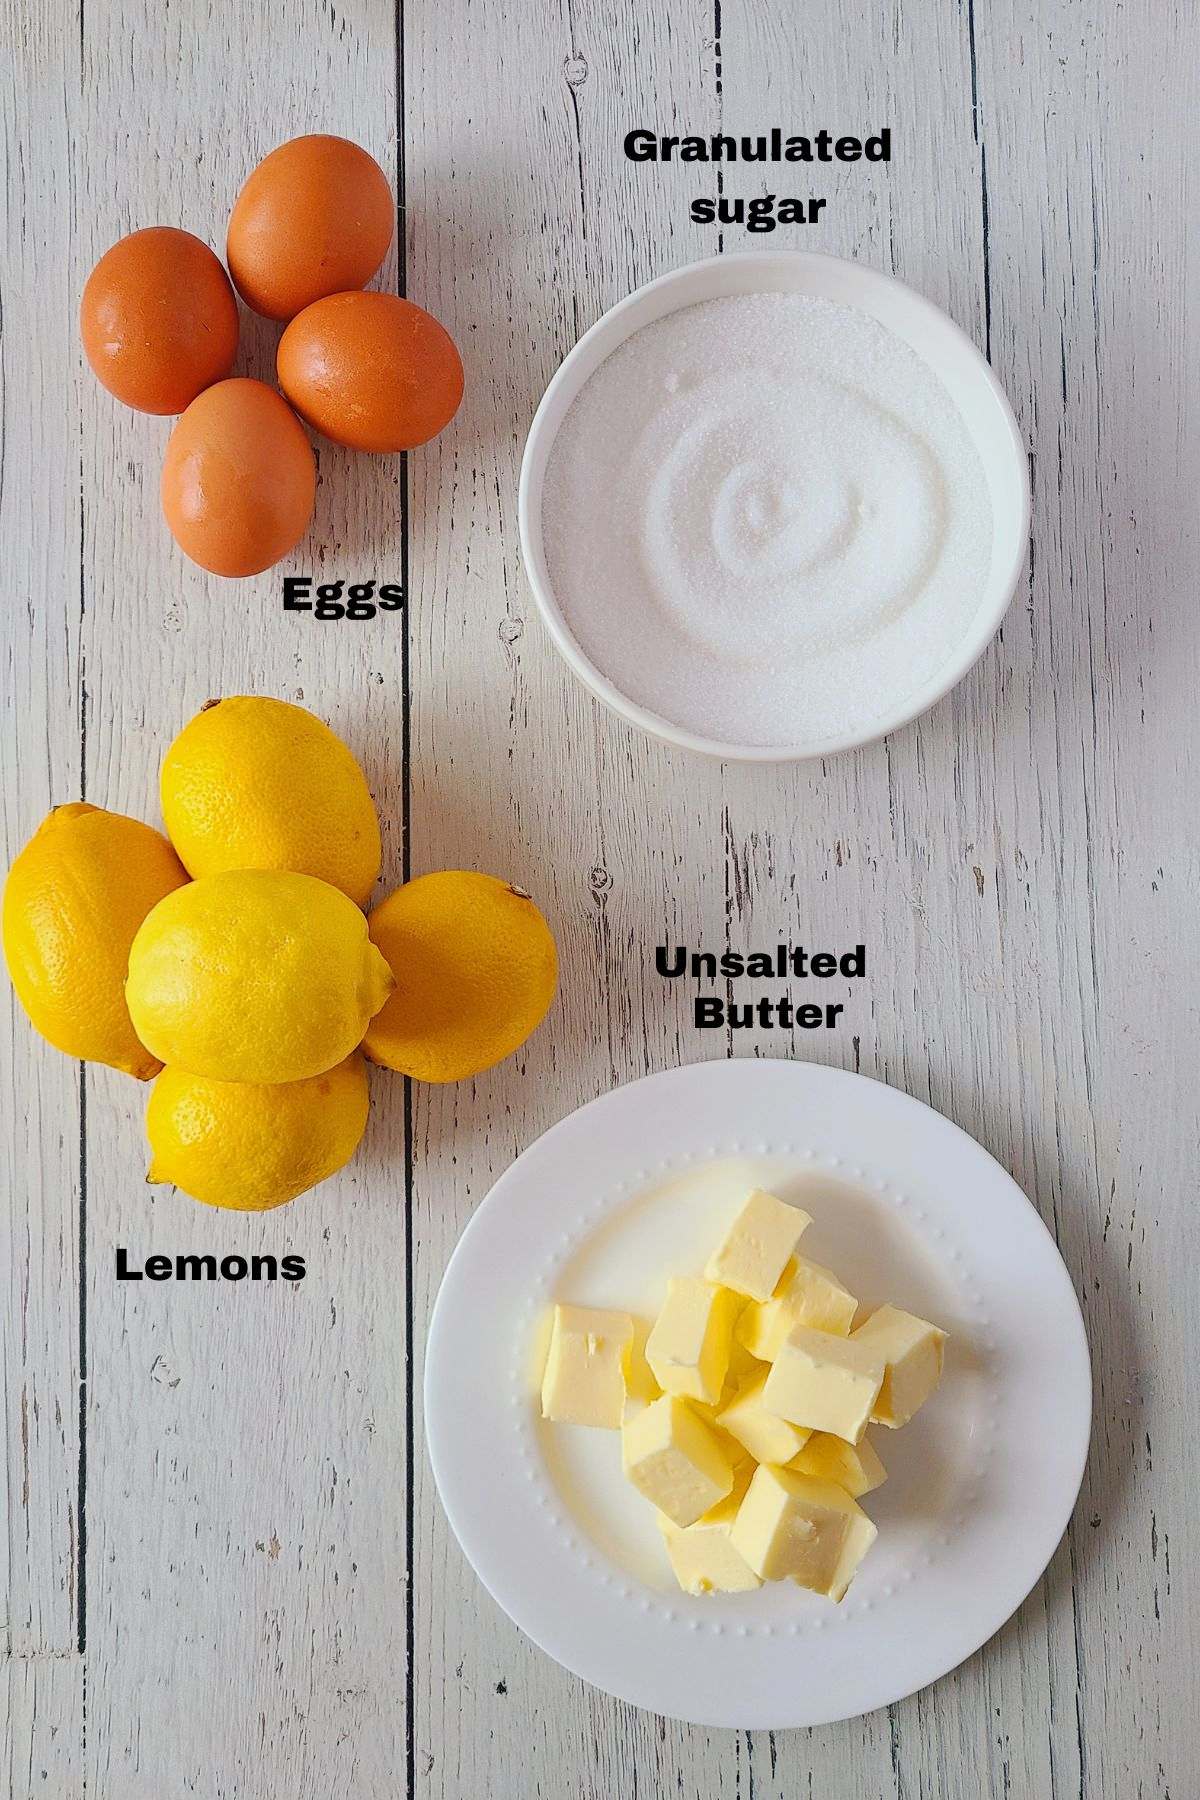 Ingredients for lemon curd:lemons, eggs, granulated sugar and unsalted butter